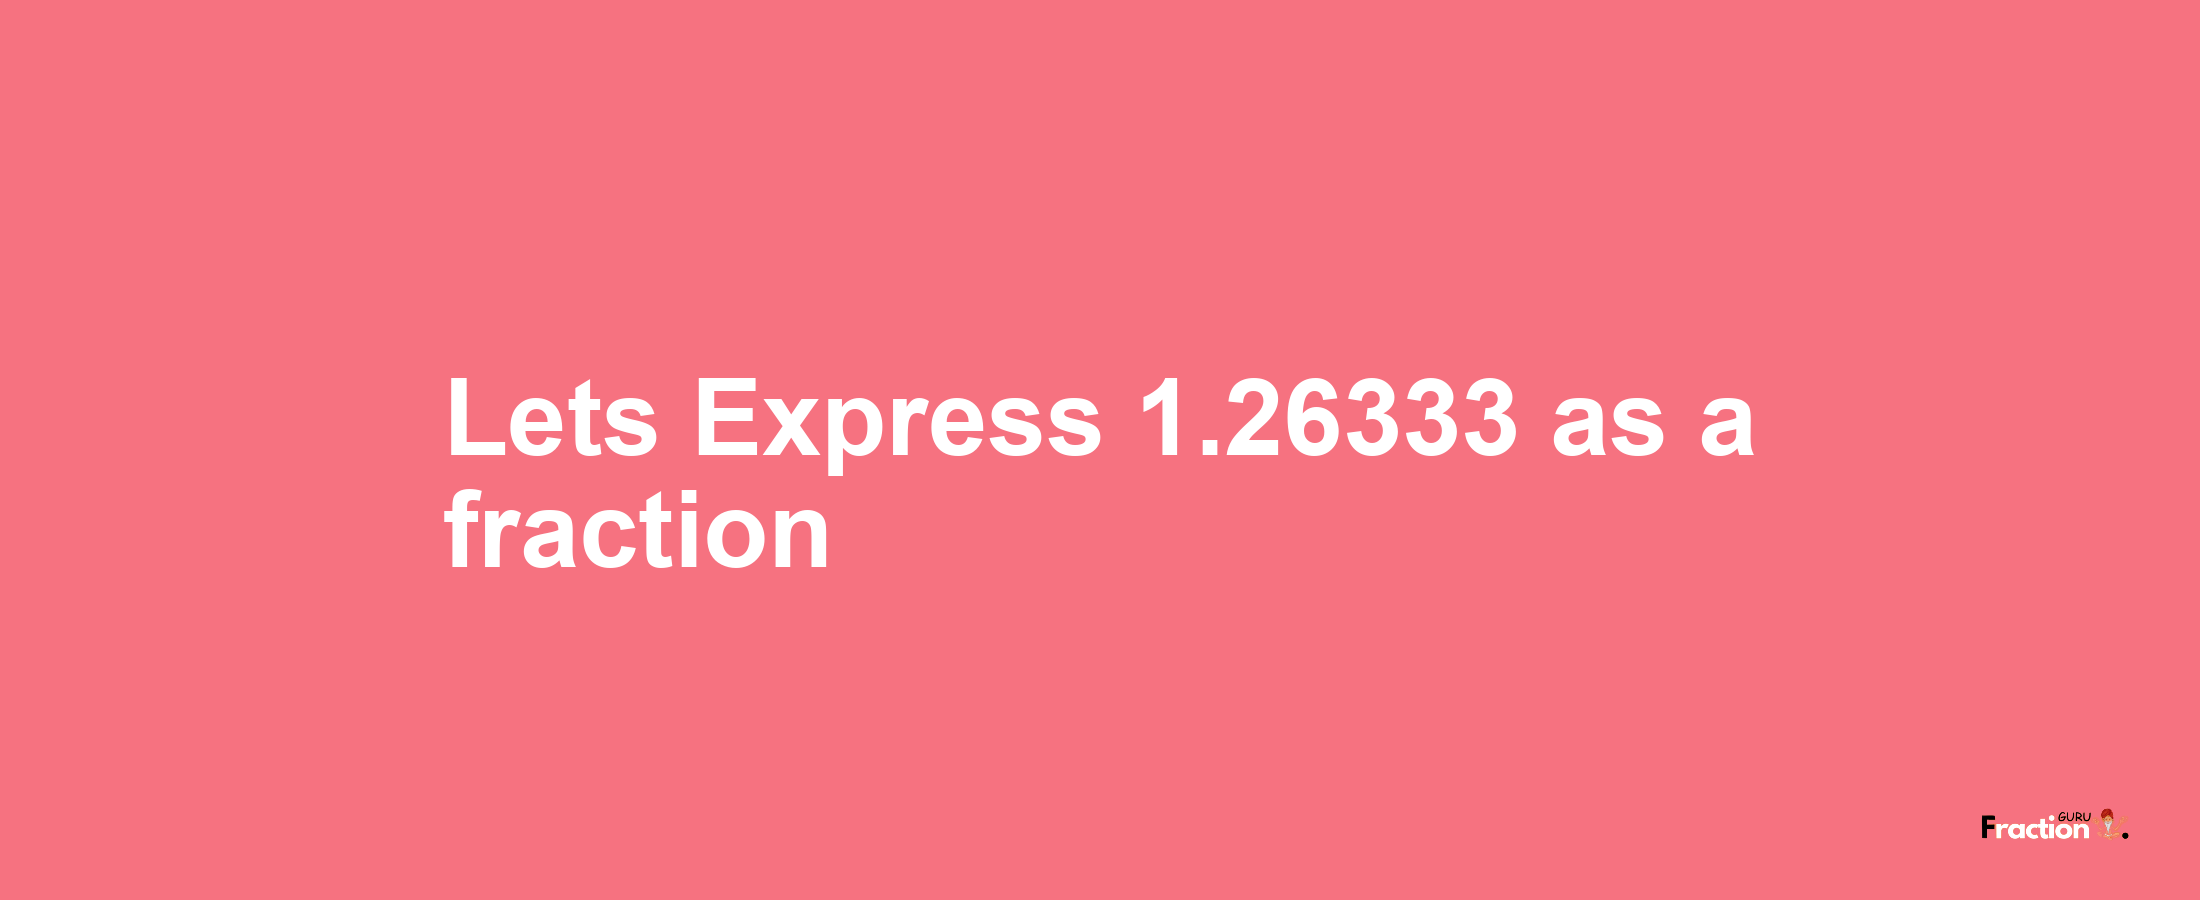 Lets Express 1.26333 as afraction